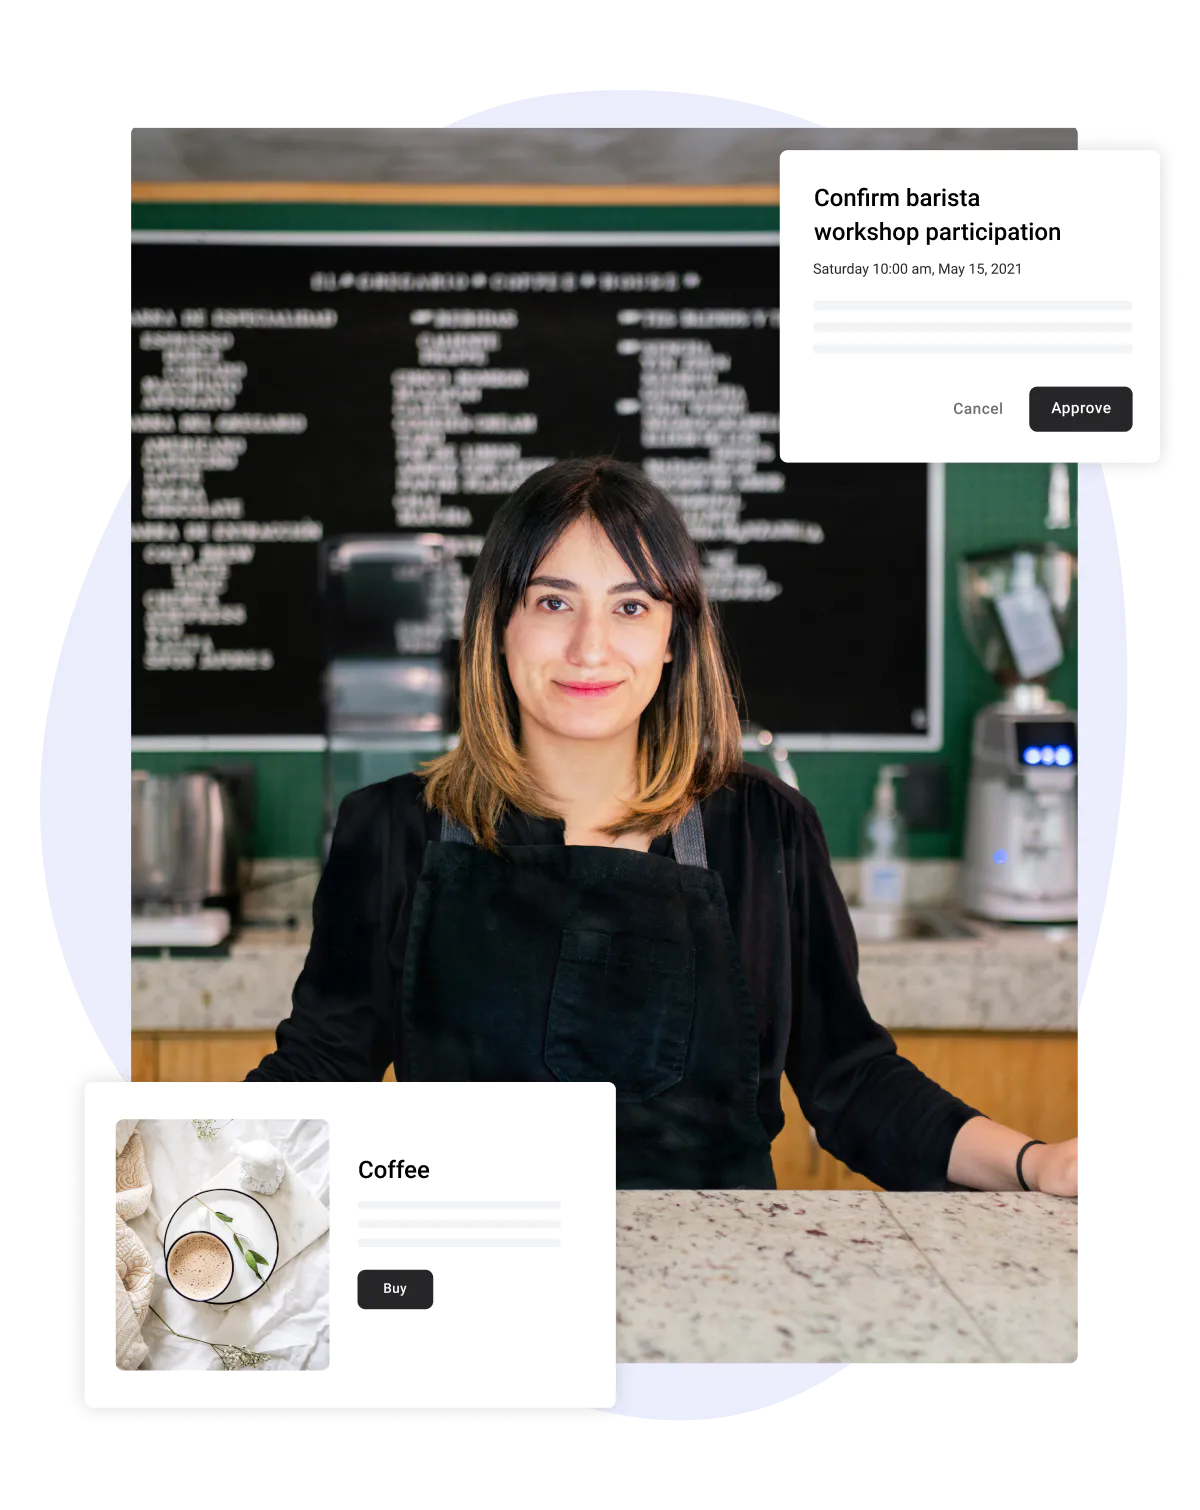 Image of a woman working in a coffee shop. 2 different overlays over the photo: 1. A call-to-action to buy a coffee. 2. A call-to-action to approve or cancel participation in a barista workshop.